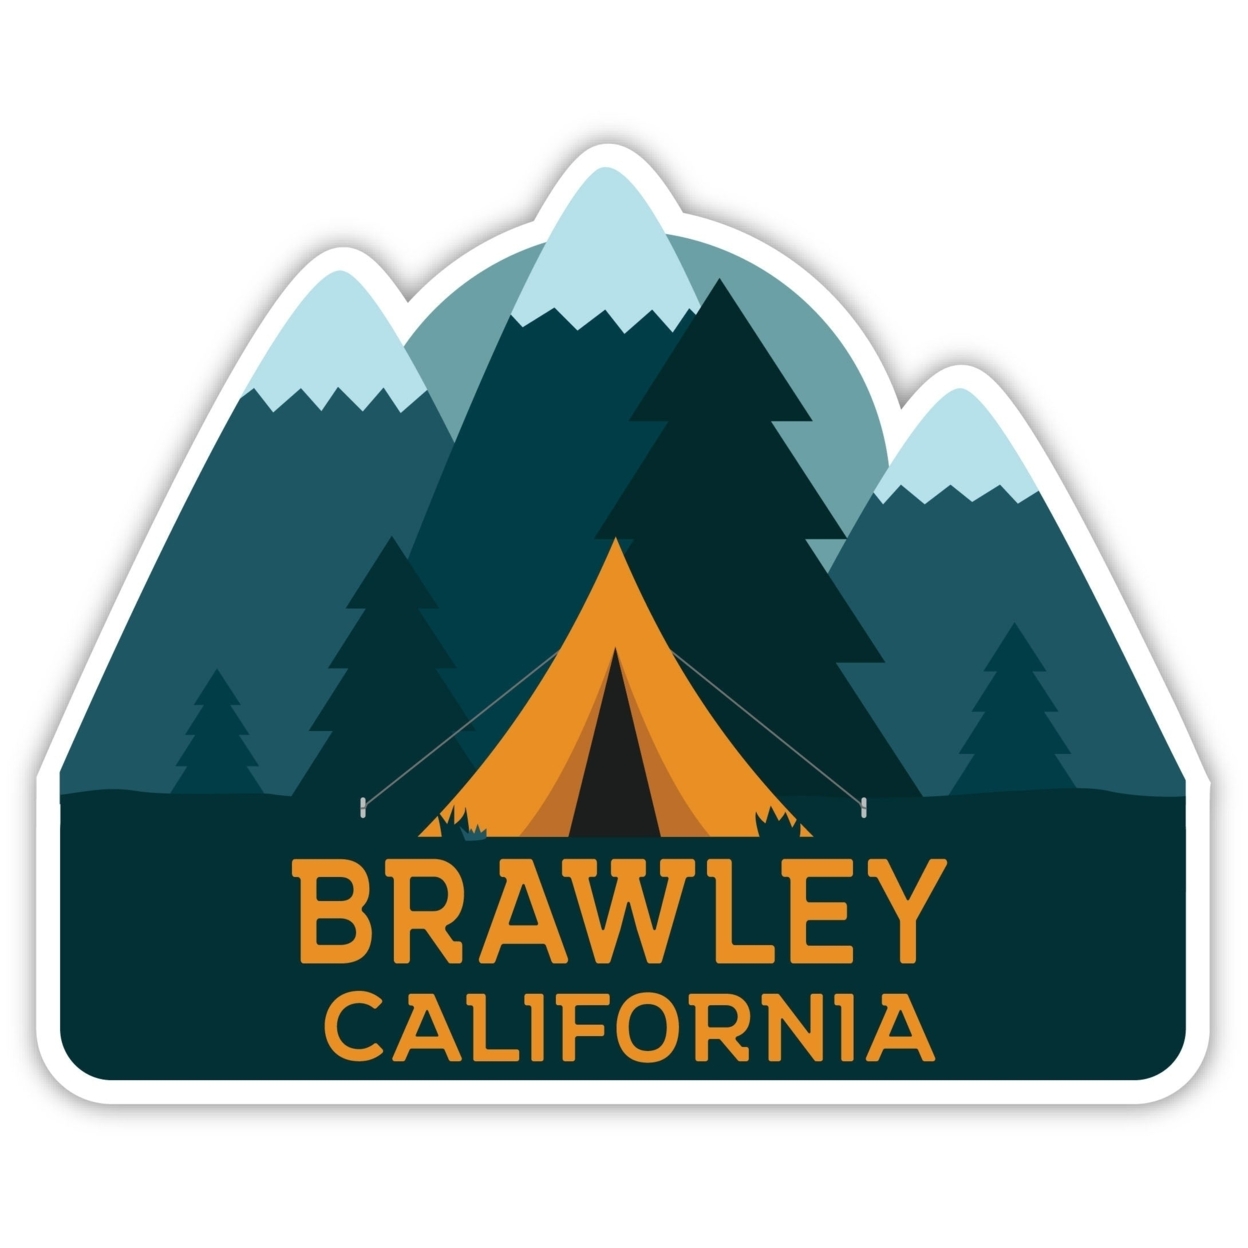 Brawley California Souvenir Decorative Stickers (Choose Theme And Size) - 4-Pack, 2-Inch, Tent